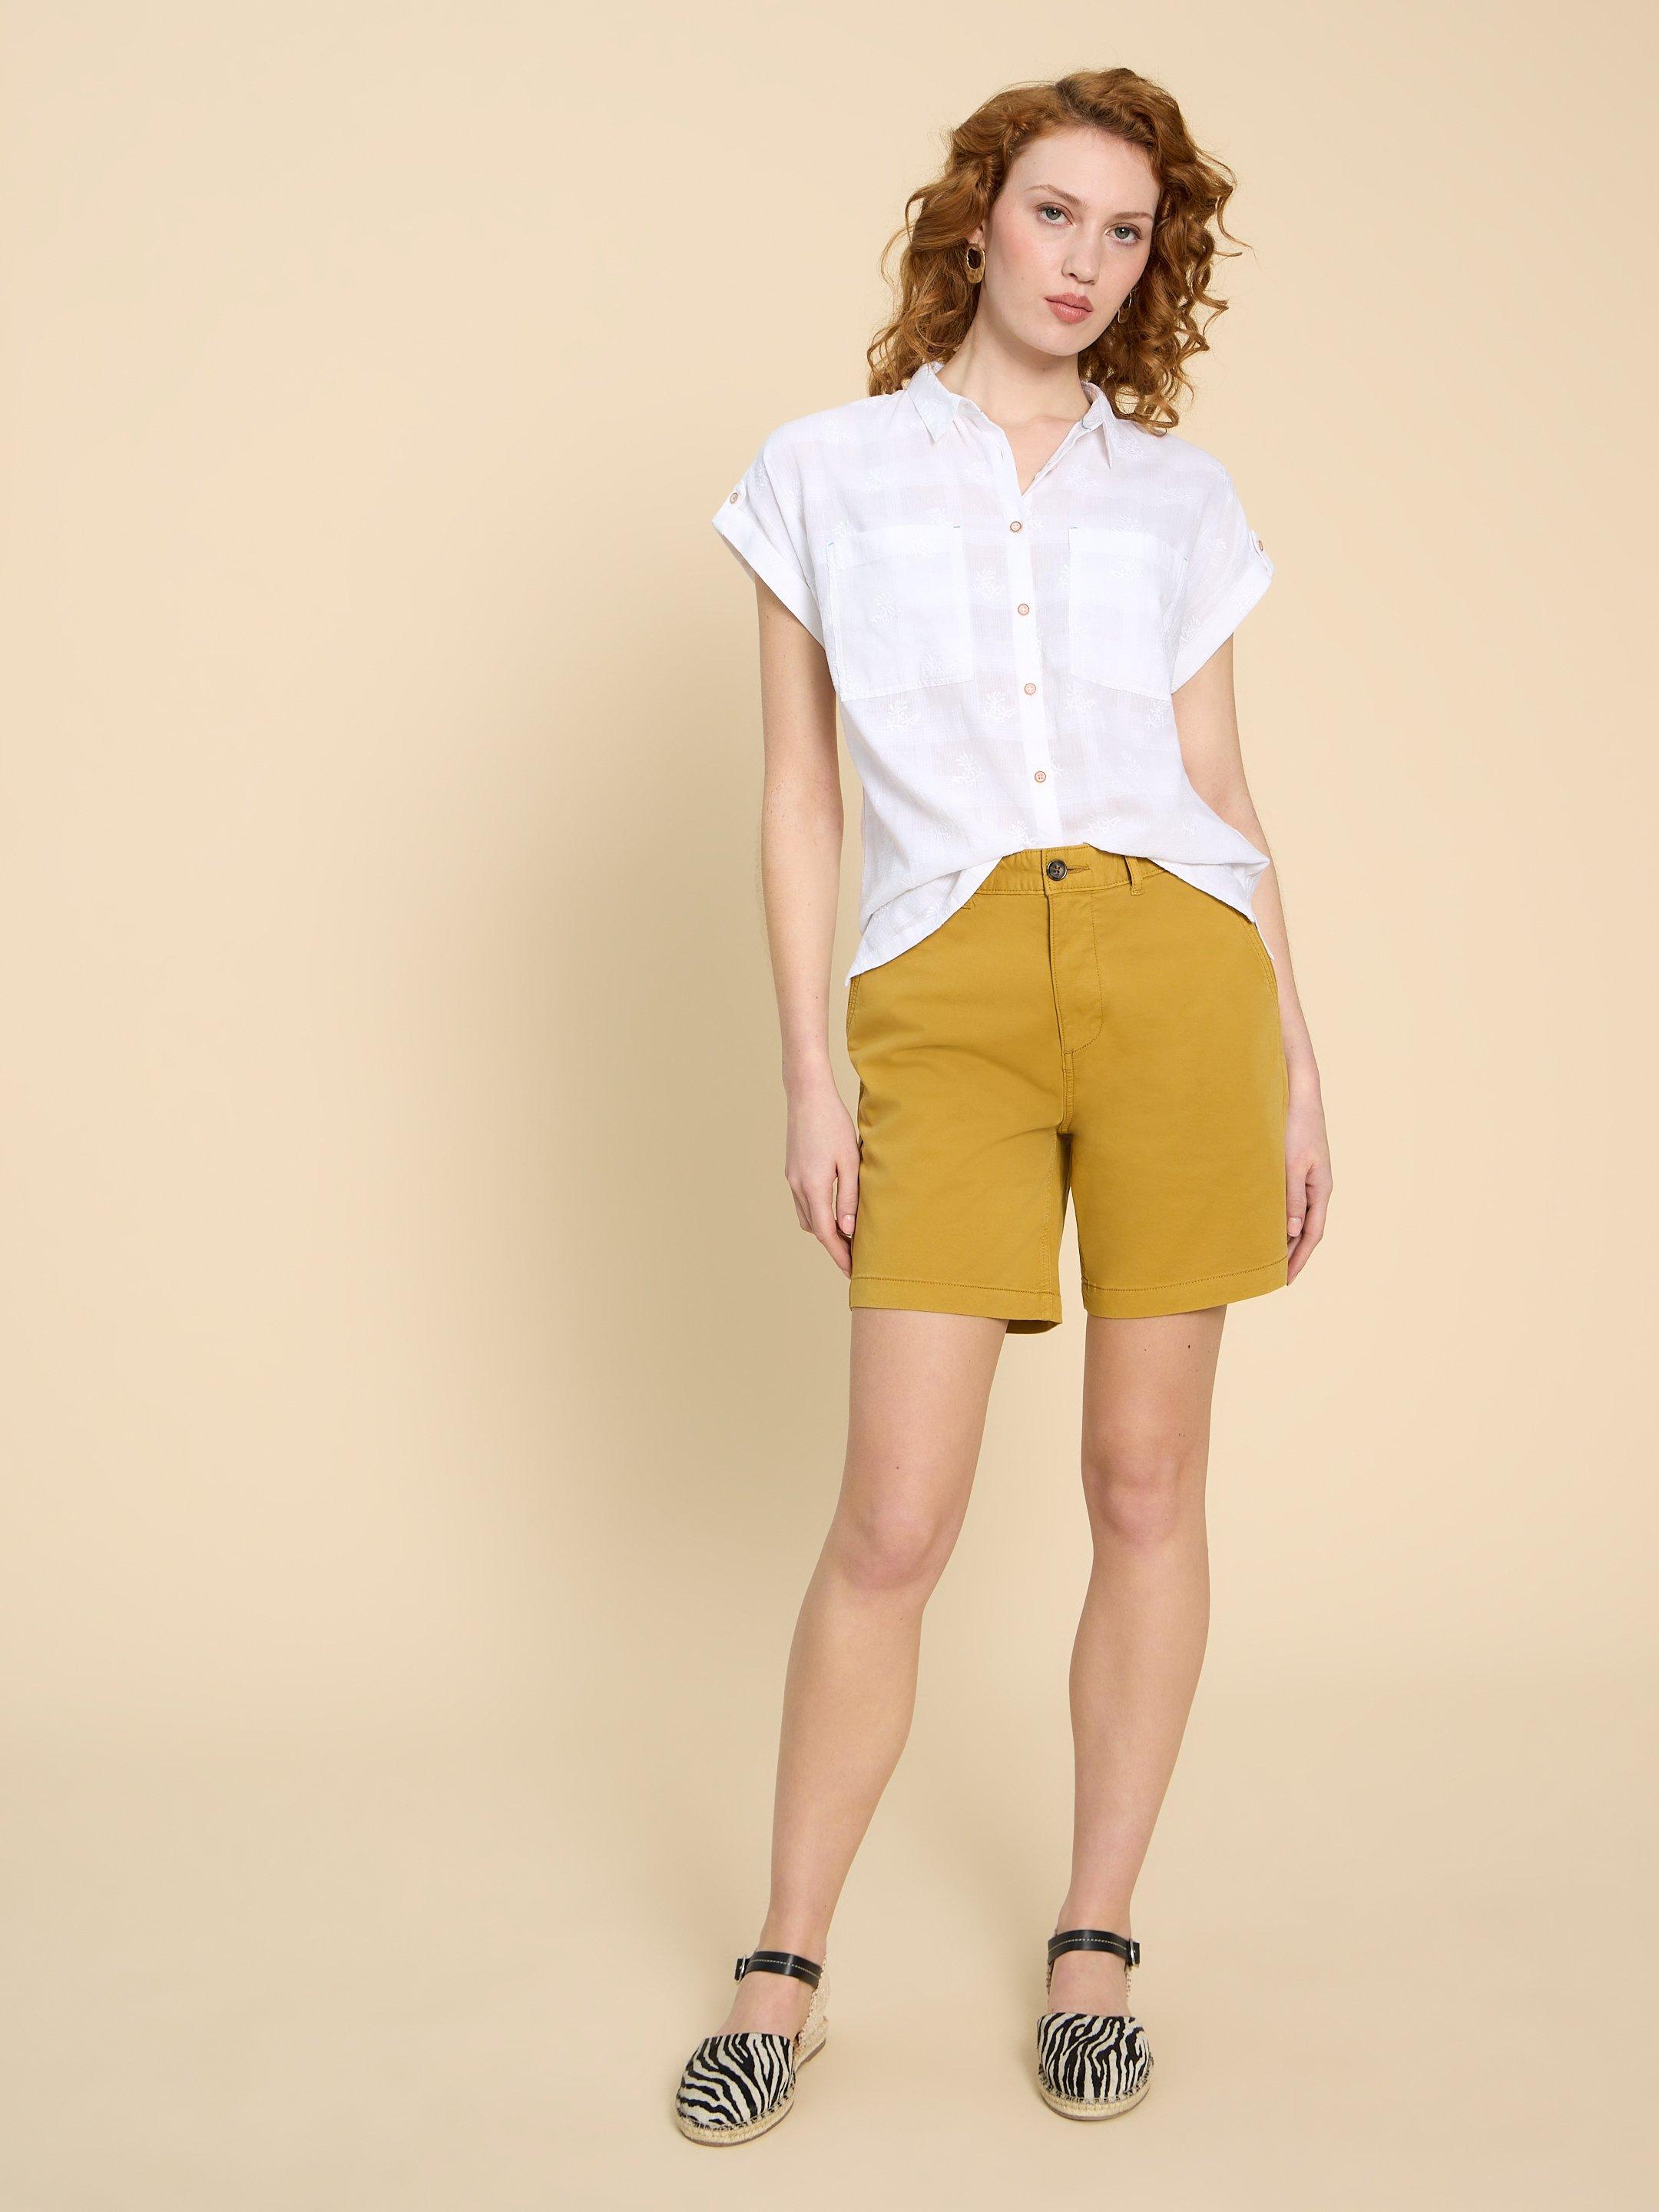 Ellie Embroidered Shirt in PALE IVORY - MODEL FRONT